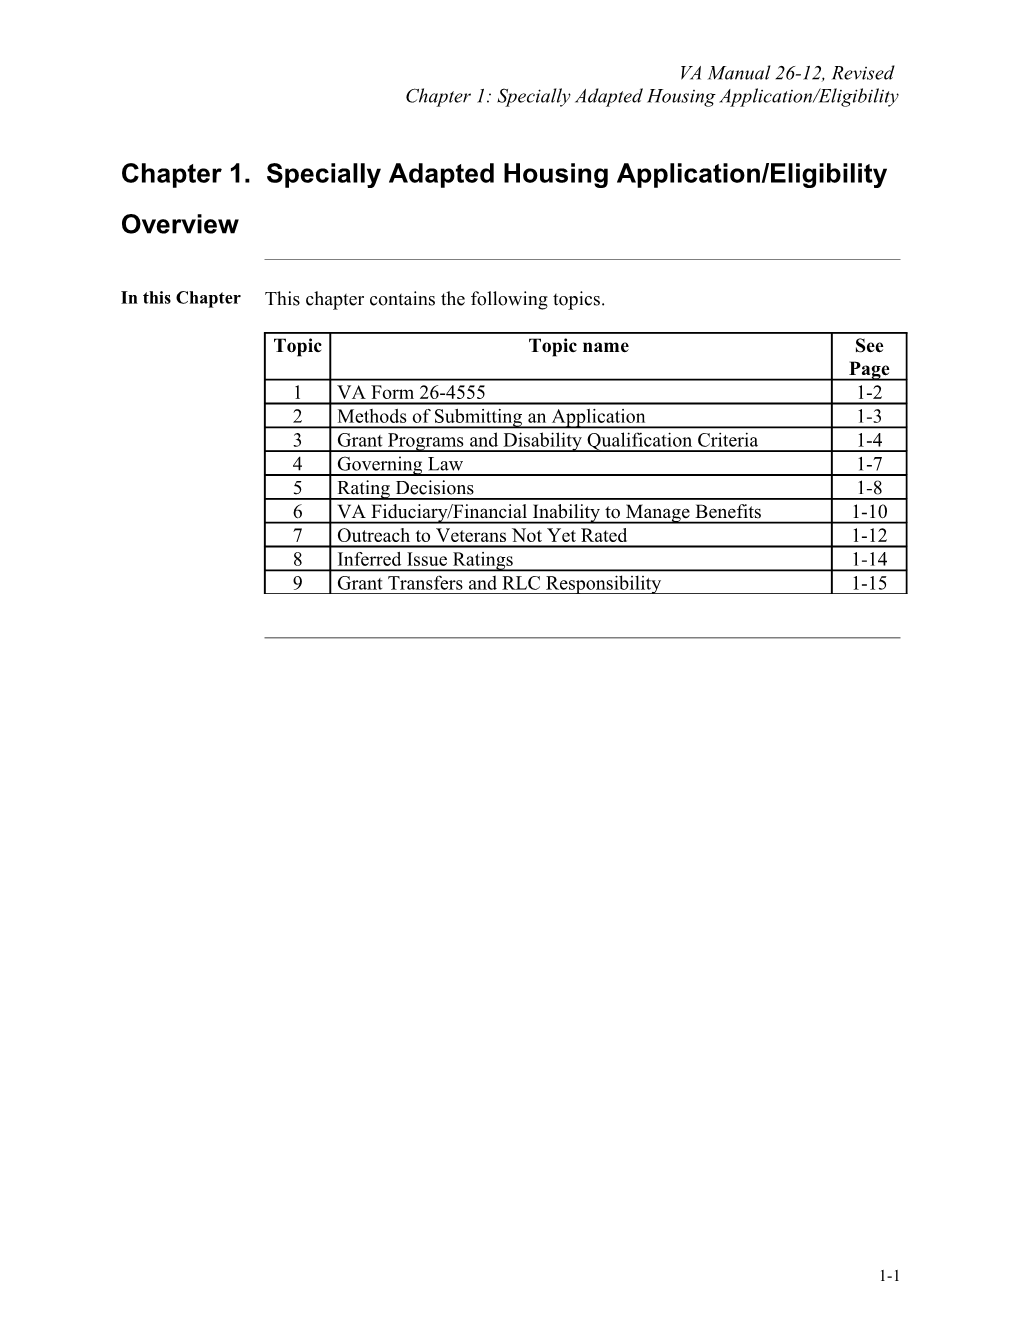 Chapter 1. Specially Adapted Housing Application/Eligibility